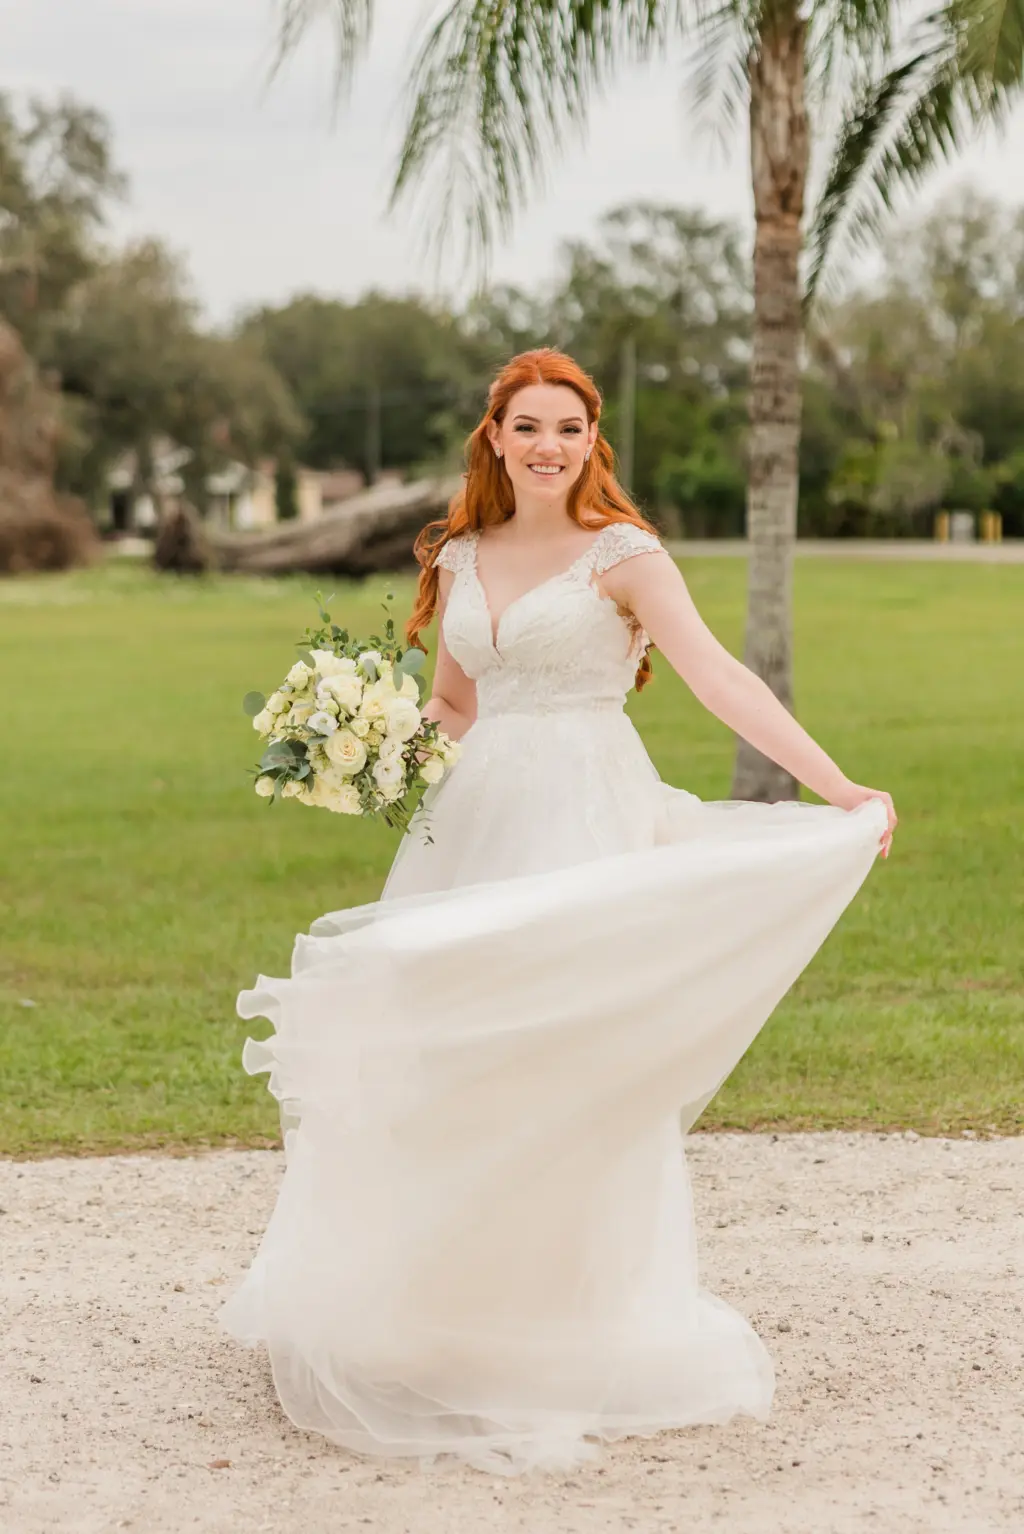 Elegant Bridal Hair and Makeup Ideas | Ivory Lace Cap-Sleeve Tulle A-Line David's Bridal Wedding Dress Inspiration | White Roses and Greenery Bridal Bouquet | Tampa Bay Photographer Mary Anna Photography